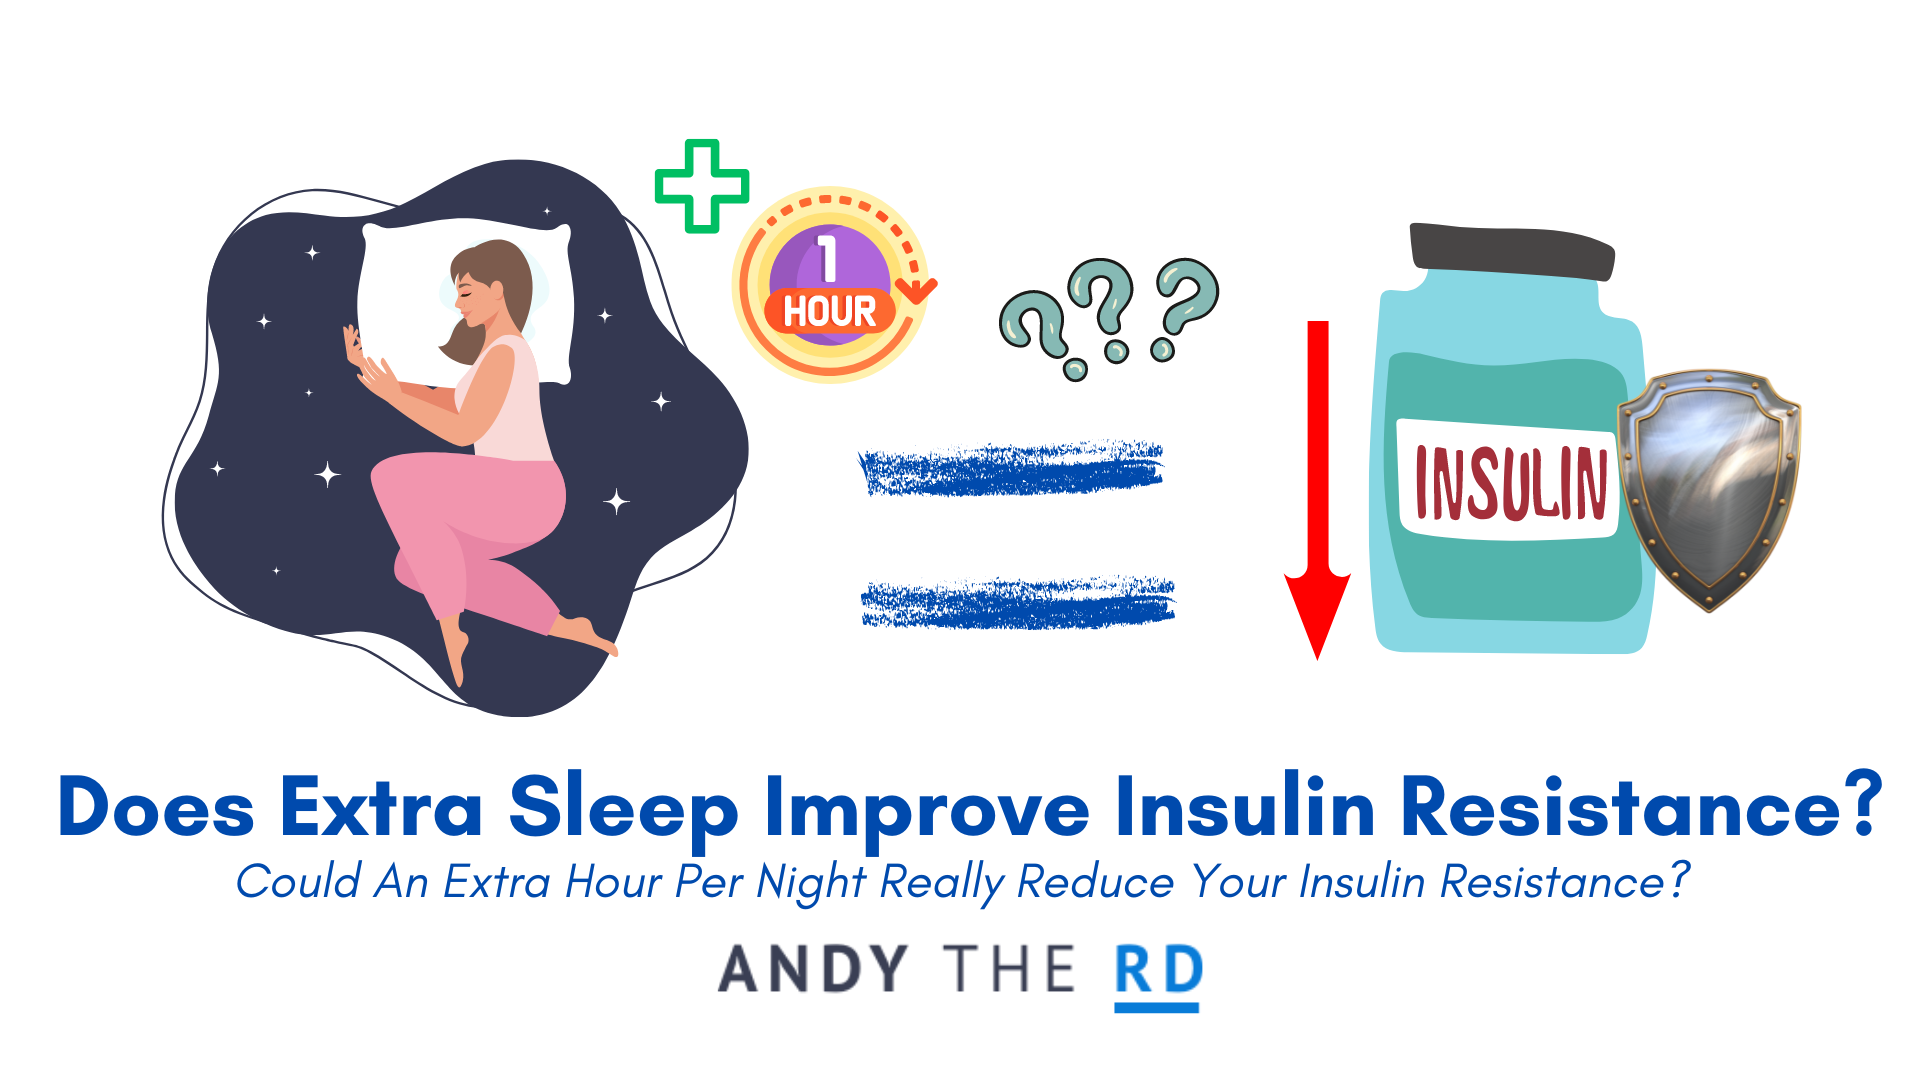 Sleeping More Reduces Your Insulin Resistance